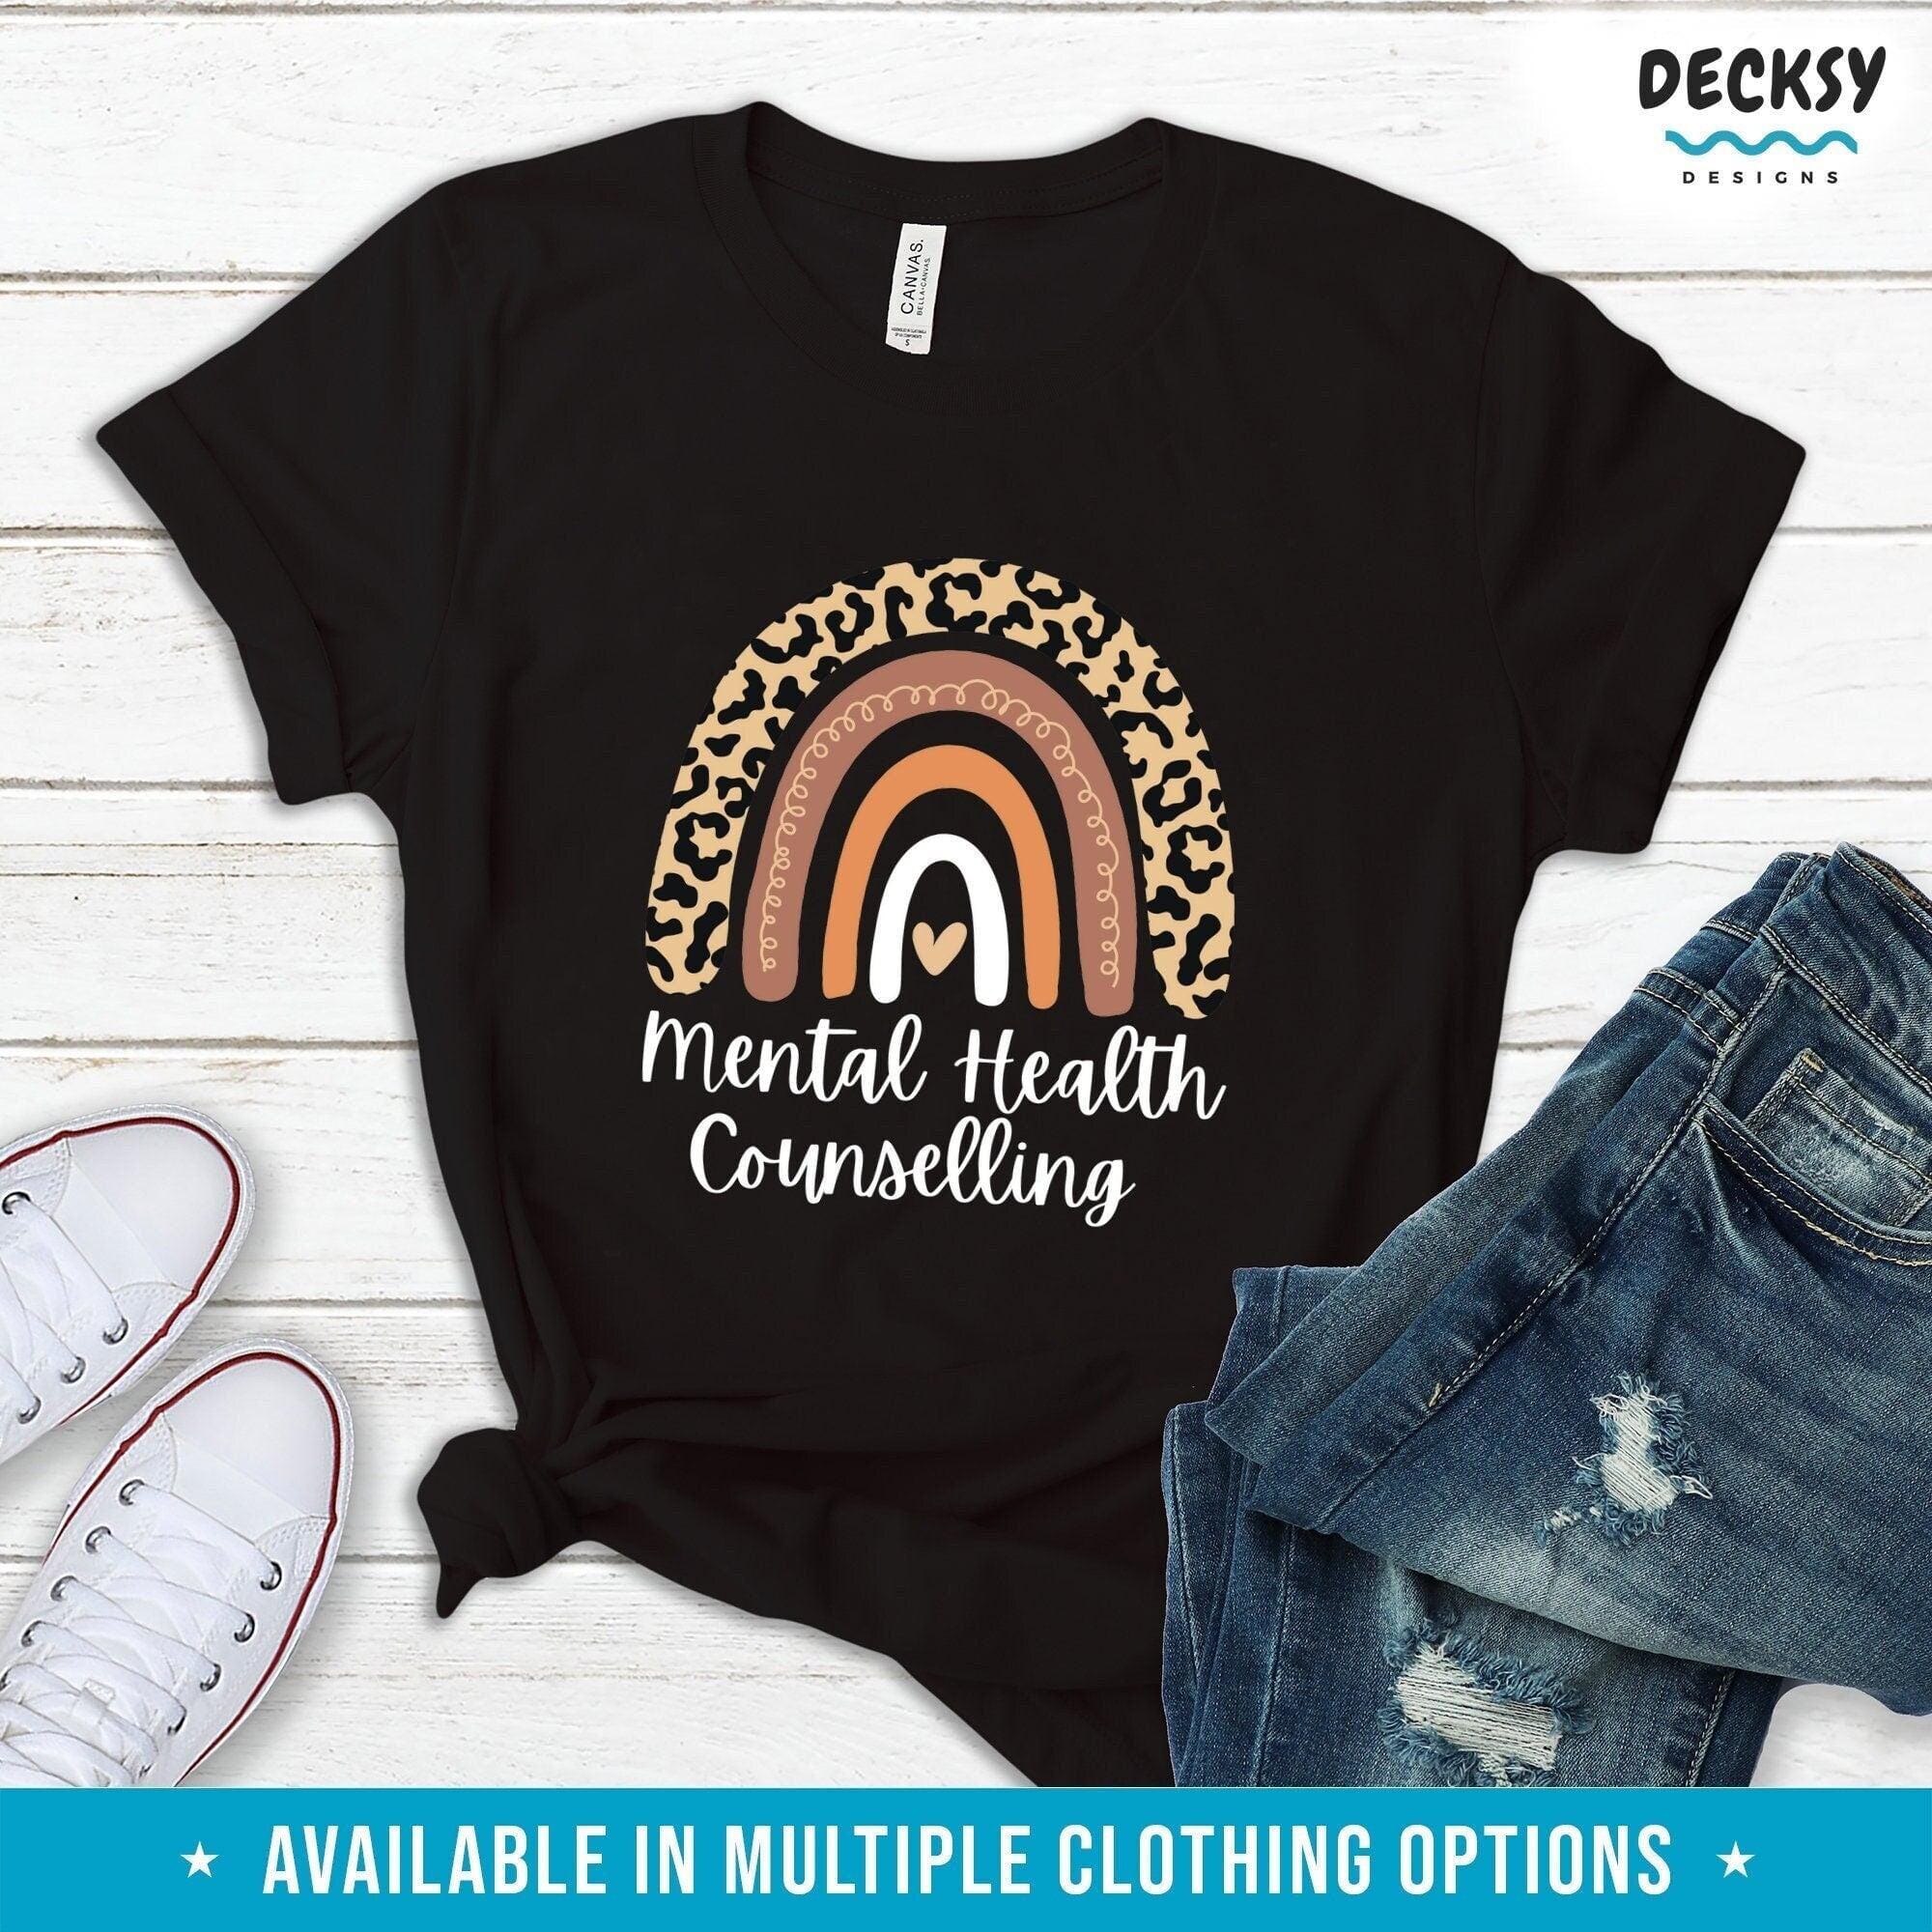 Mental Health Counselling Shirt, Gift For Therapist-Clothing:Gender-Neutral Adult Clothing:Tops & Tees:T-shirts:Graphic Tees-DecksyDesigns